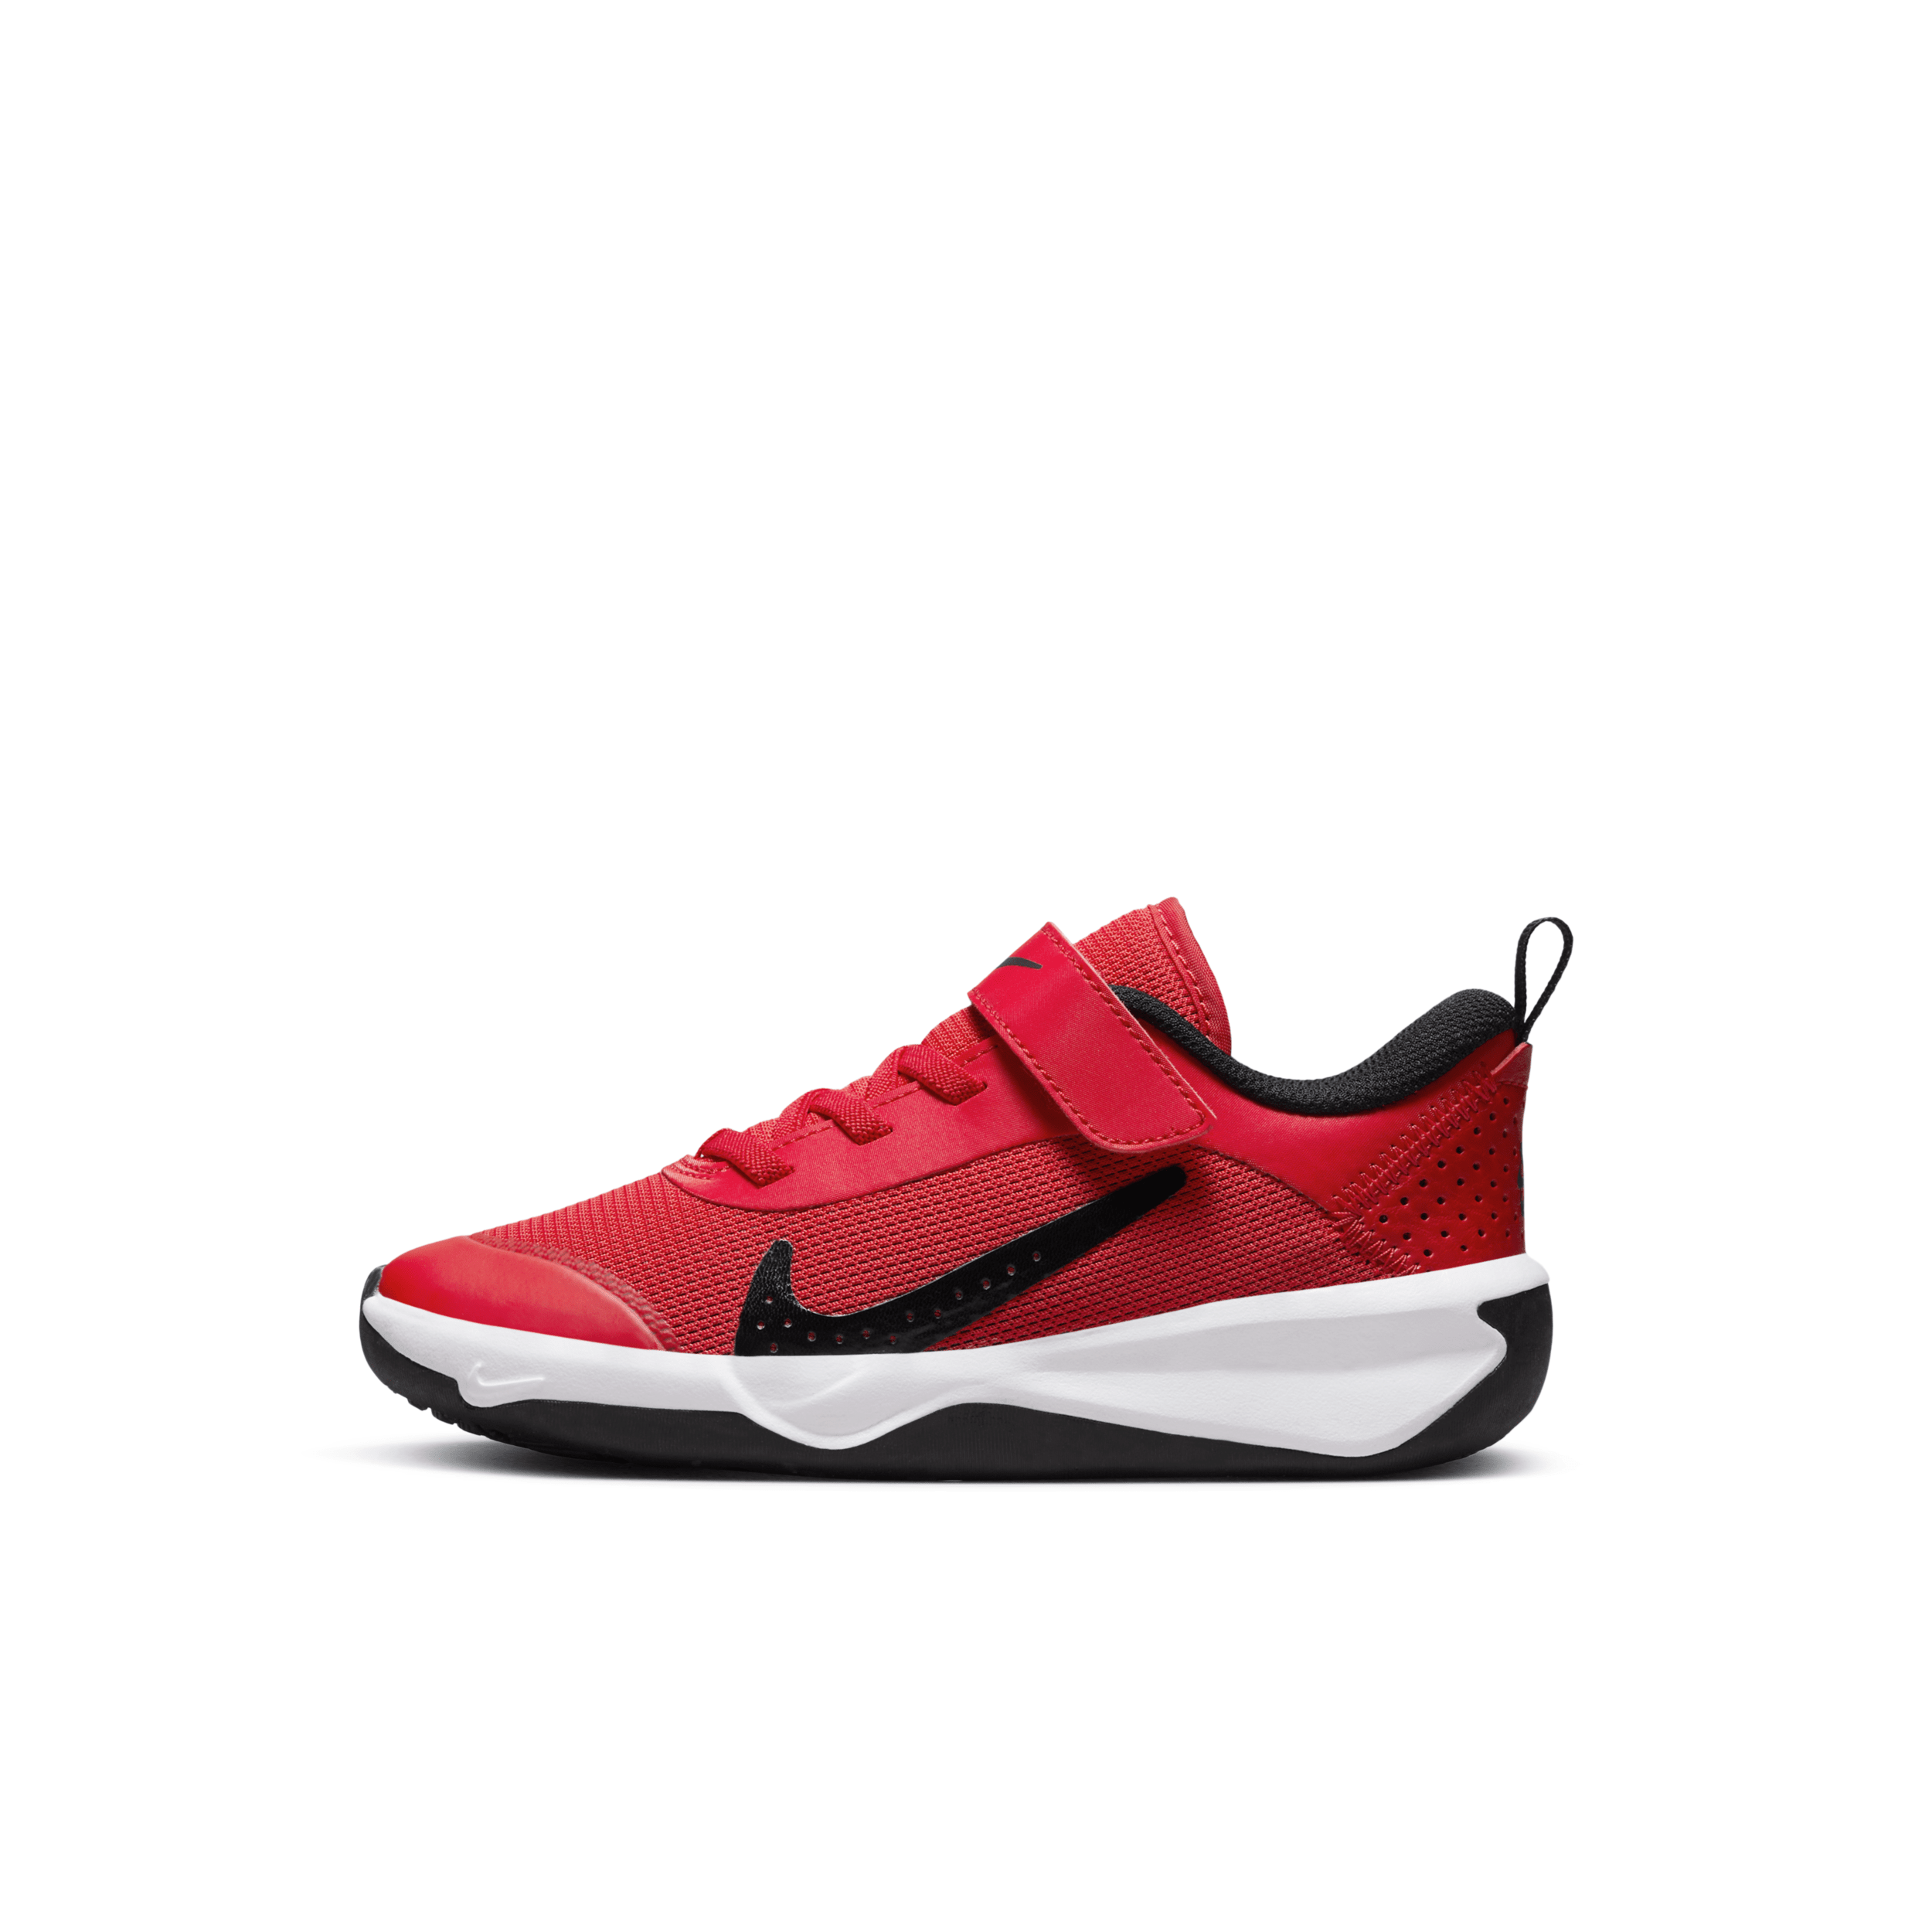 Nike Babies' Omni Multi-court Little Kids' Shoes In Red